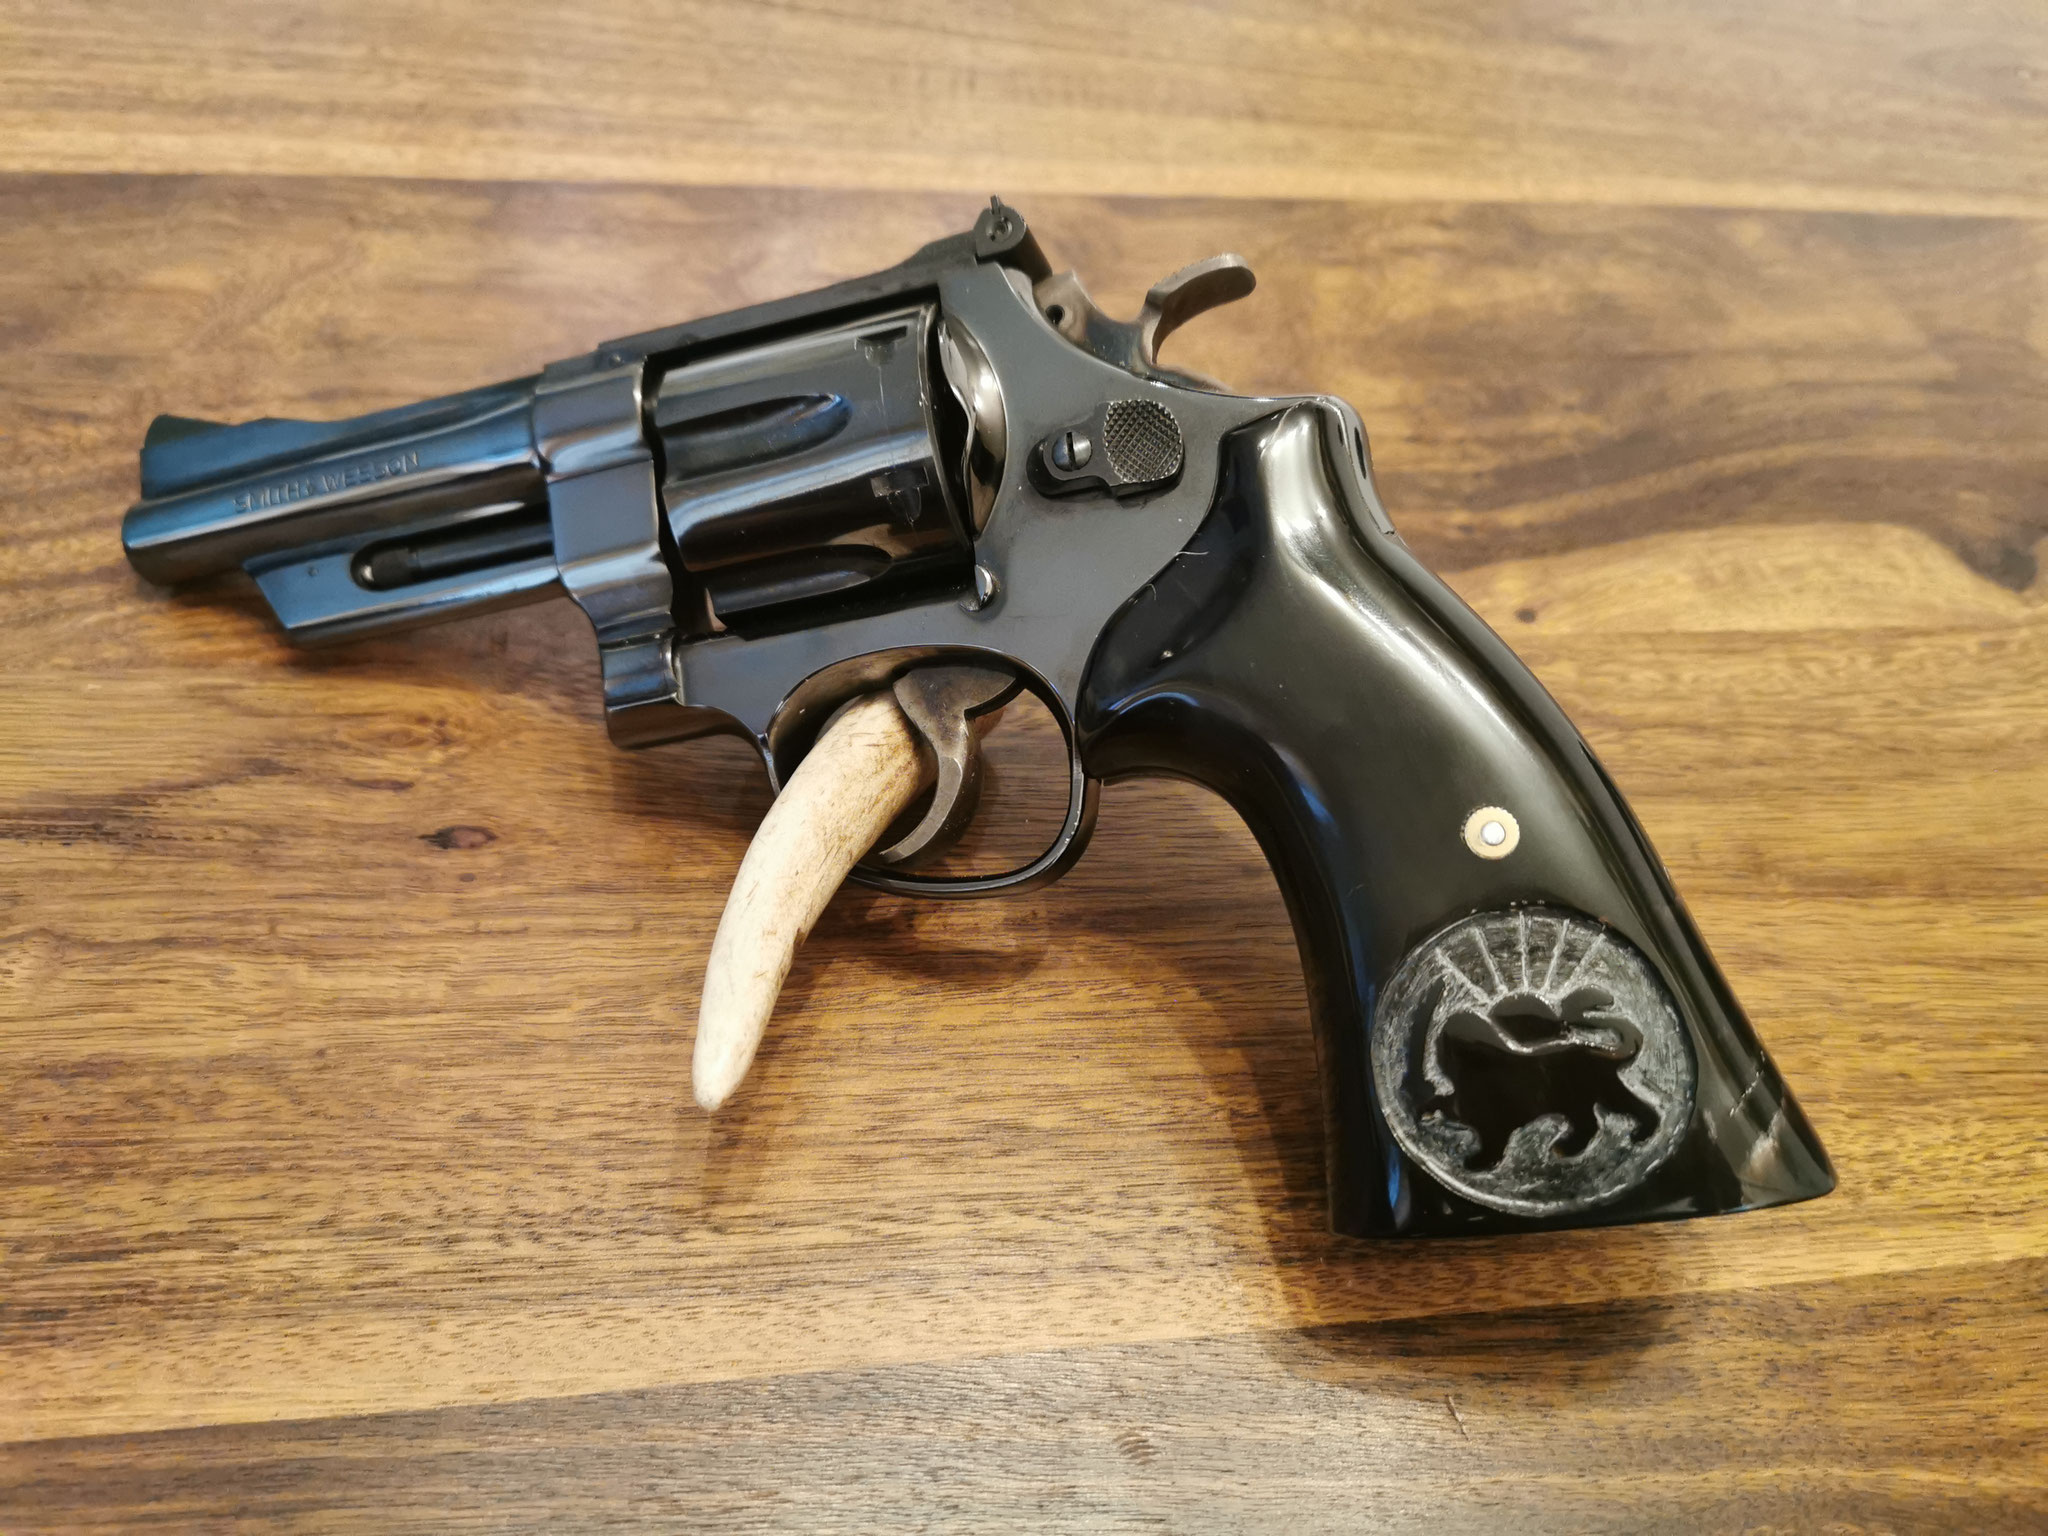 Smith & Wesson Model 27